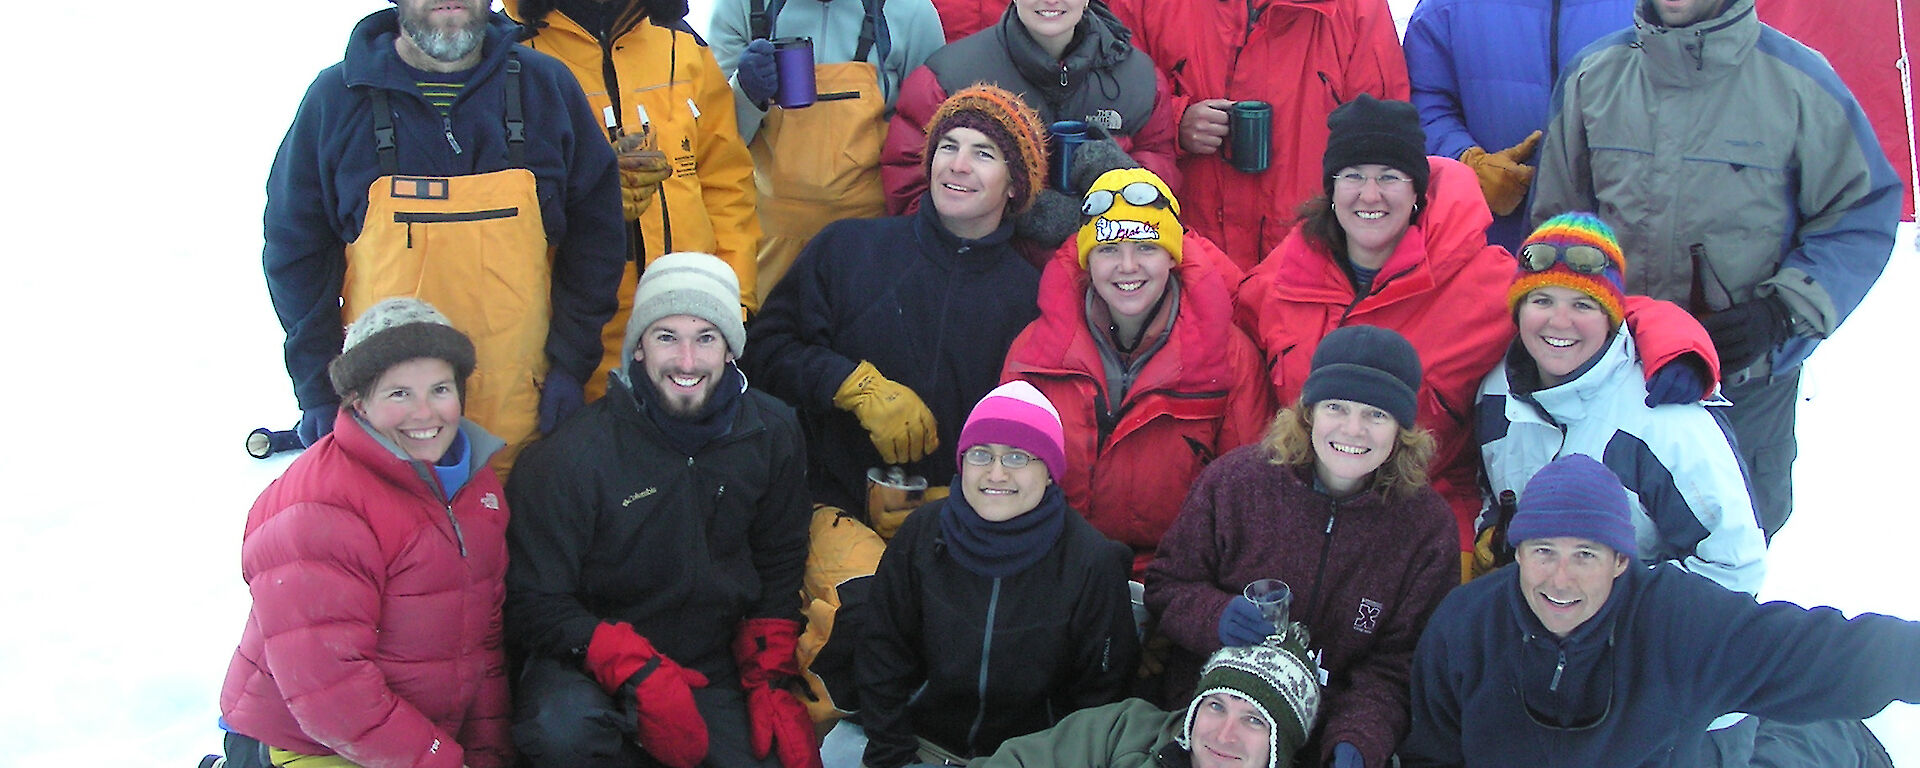 A group of expeditioners smile and pose for a photo on the snow.